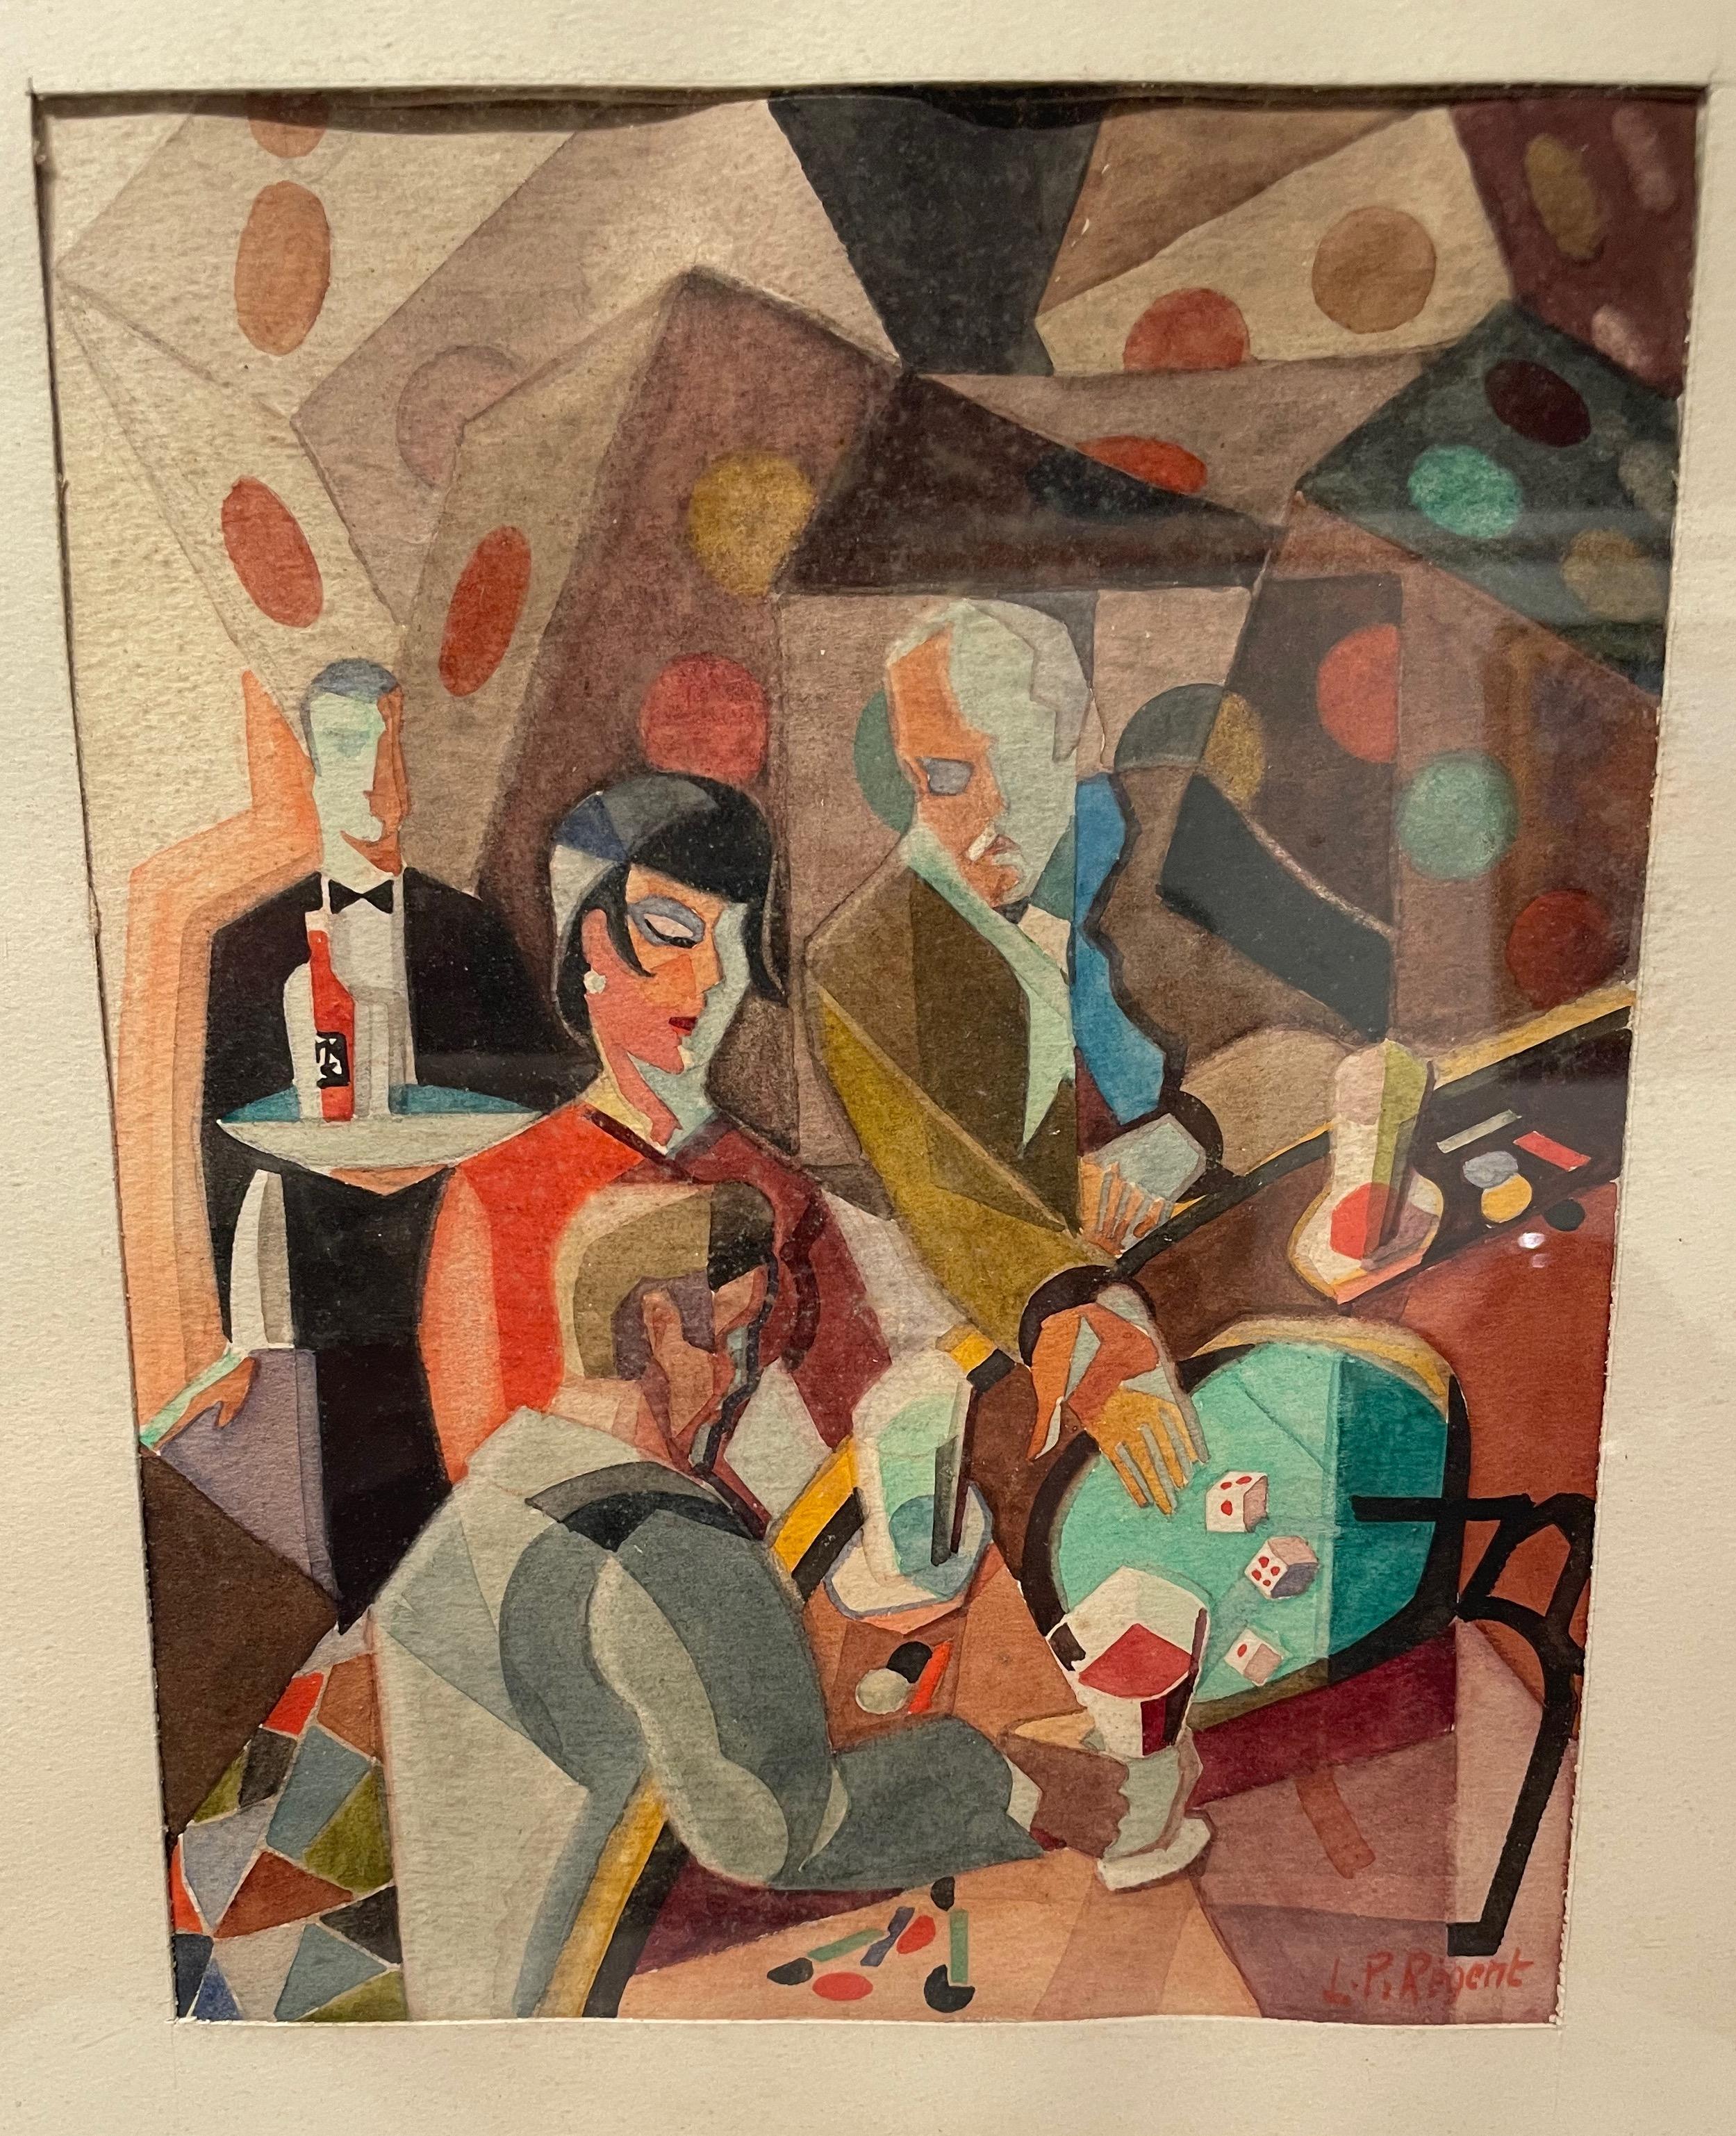 P. Regent cubist painting “GAMERS IN A BAR” 1930. Fantastic original painting showing the cubist style of men/women/waiters in a gambling room. All of the styles and colors you associate with original cubist art from the French Art Deco period.